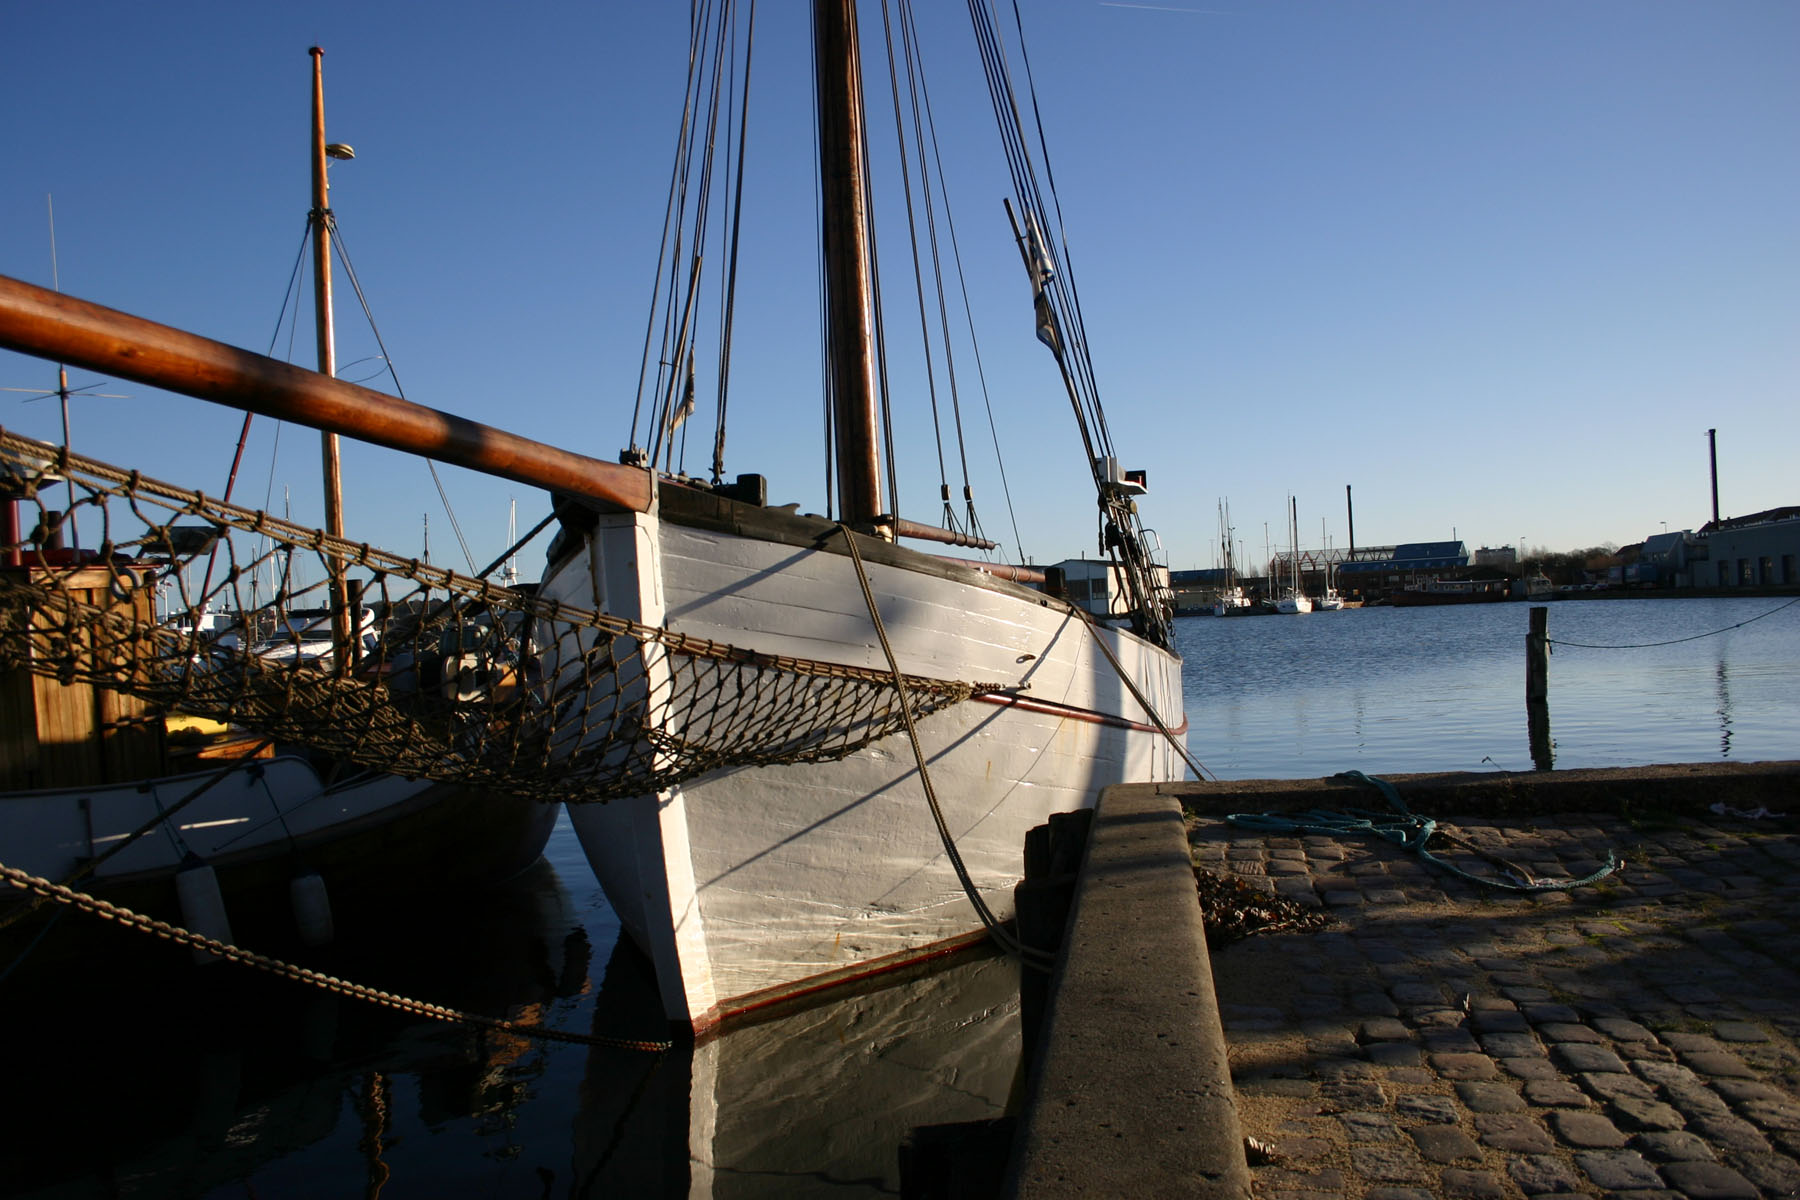 A boat by the harbor photo